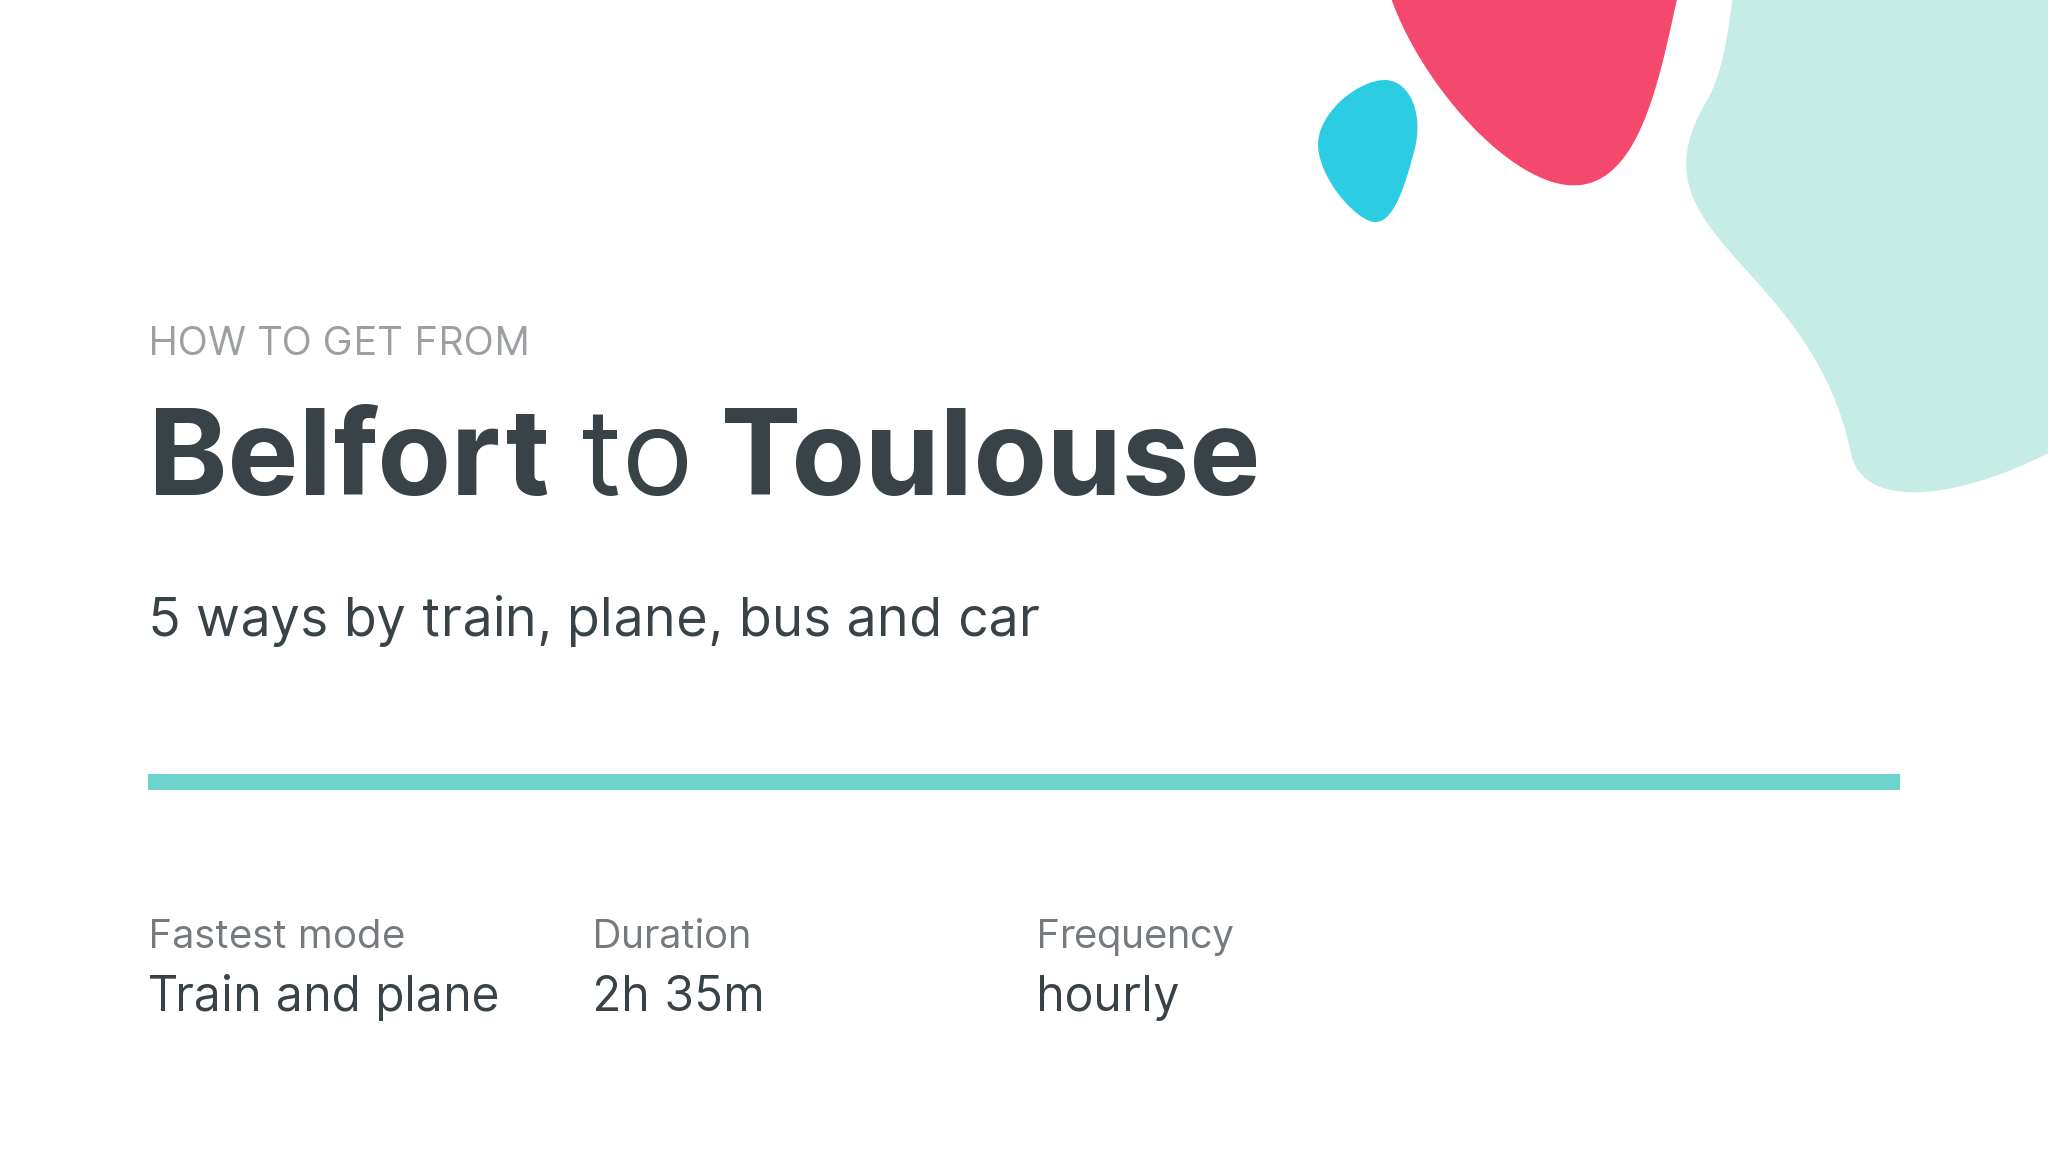 How do I get from Belfort to Toulouse